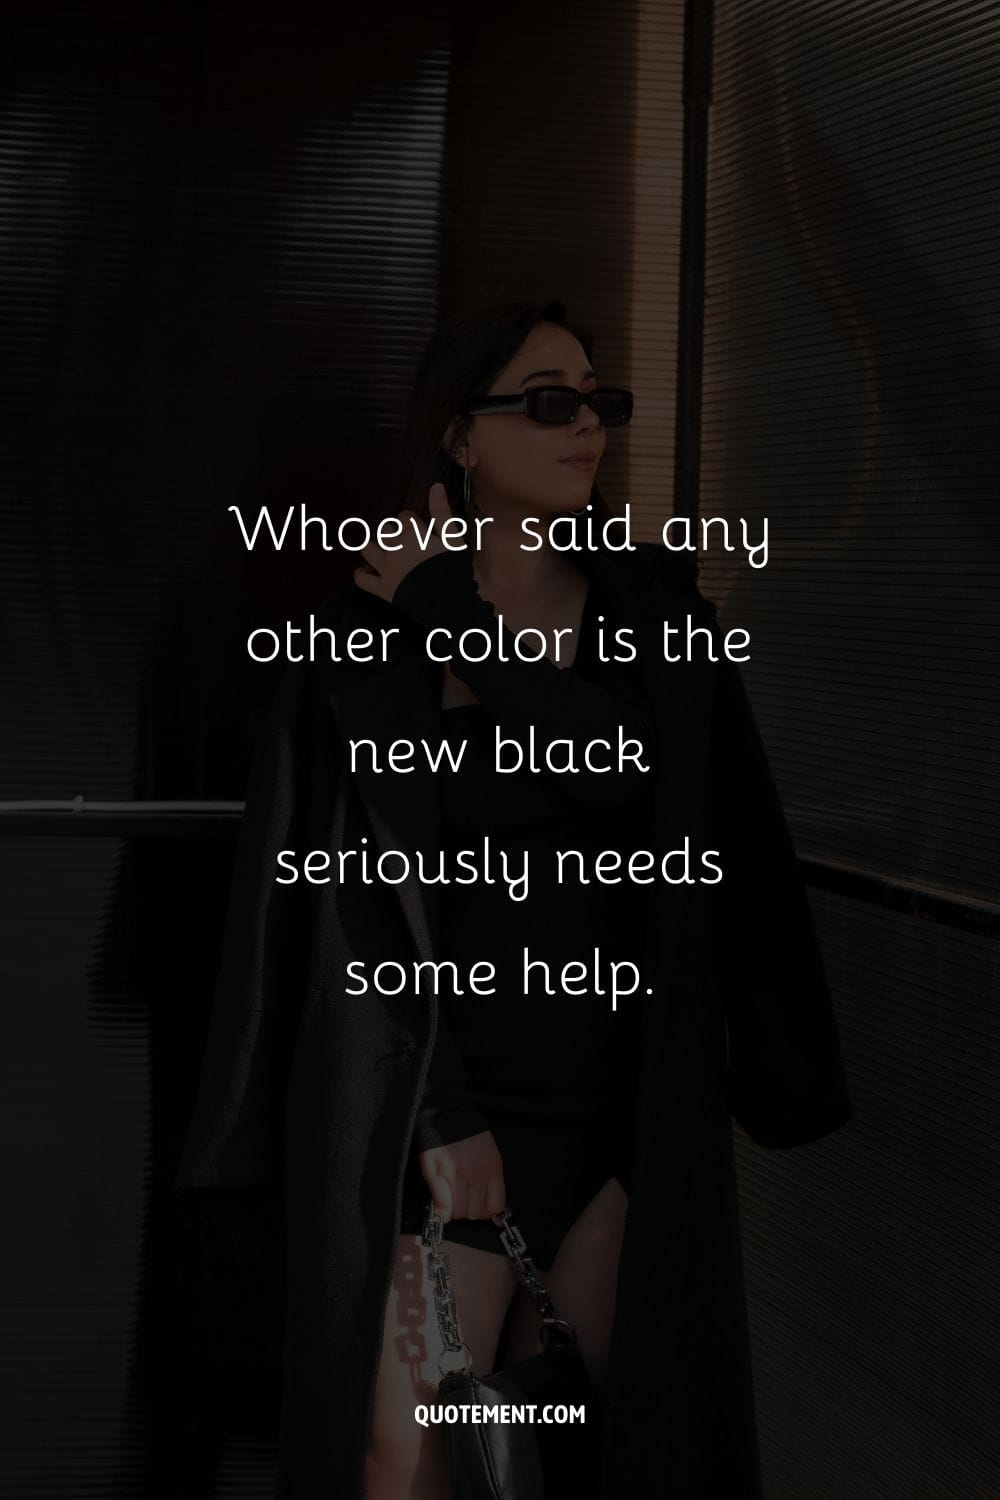 Whoever said any other color is the new black seriously needs some help.